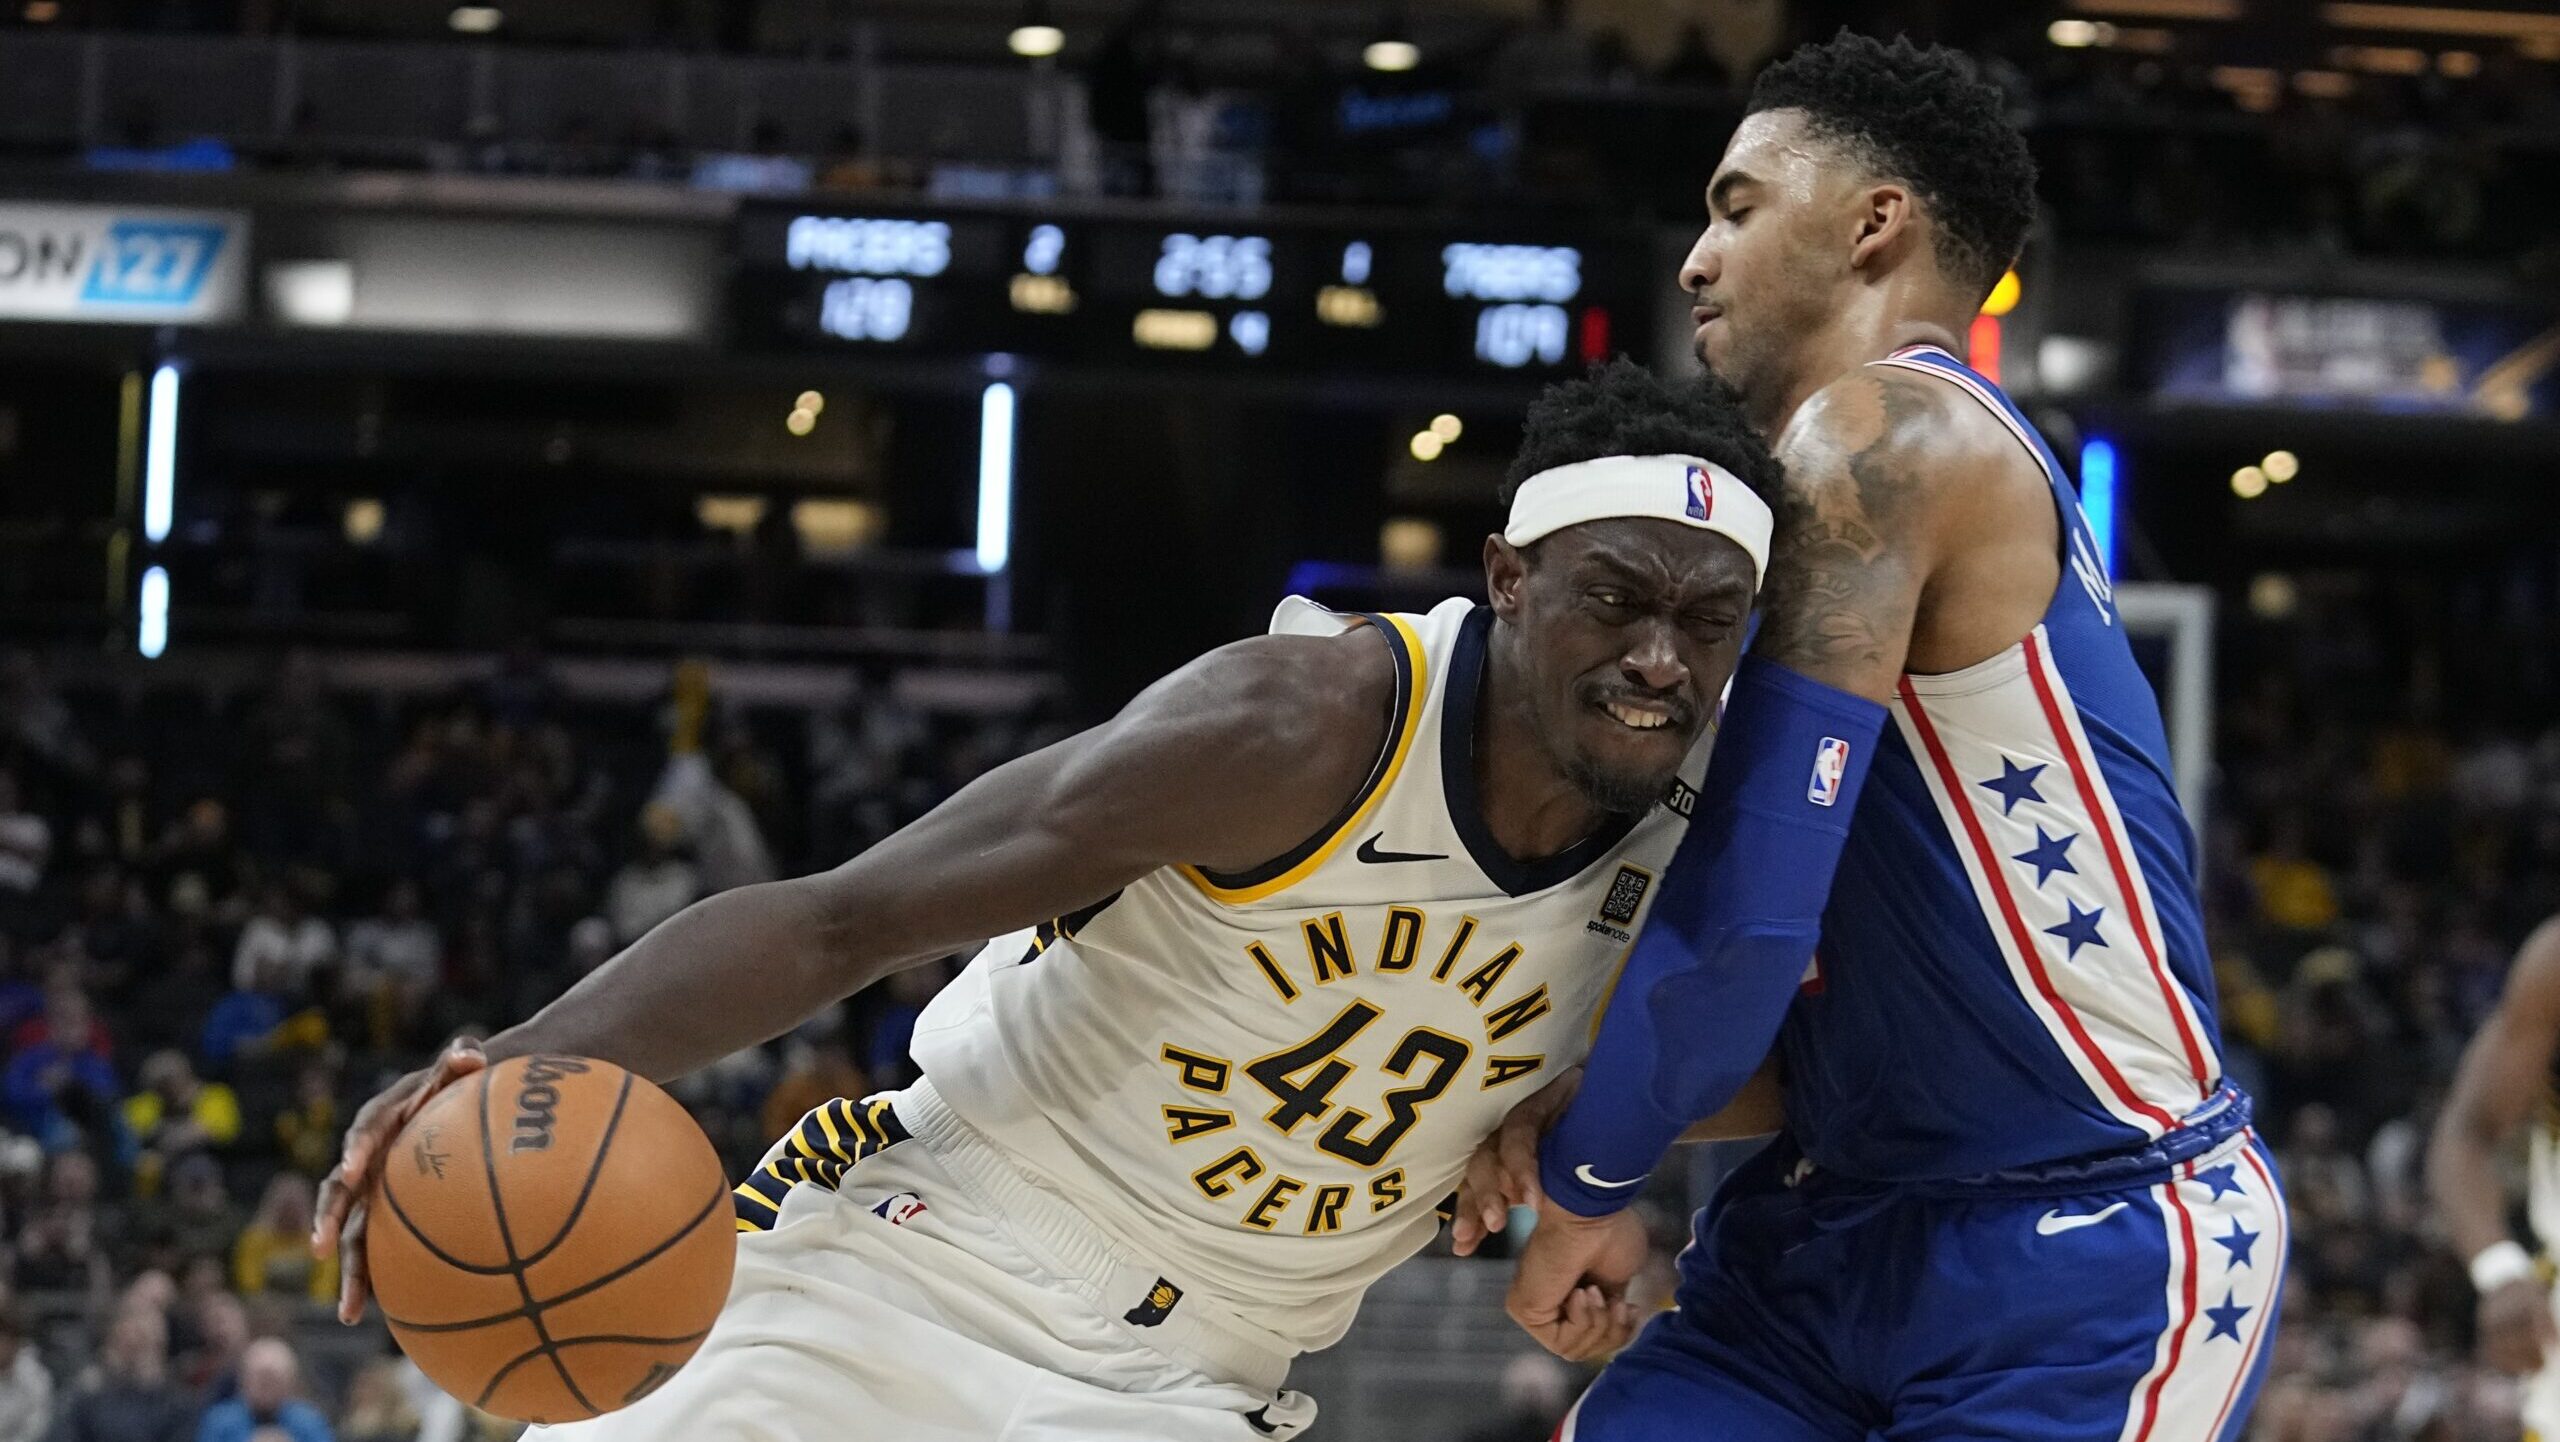 Pacers end 76ers' winning streak at 6 with victory